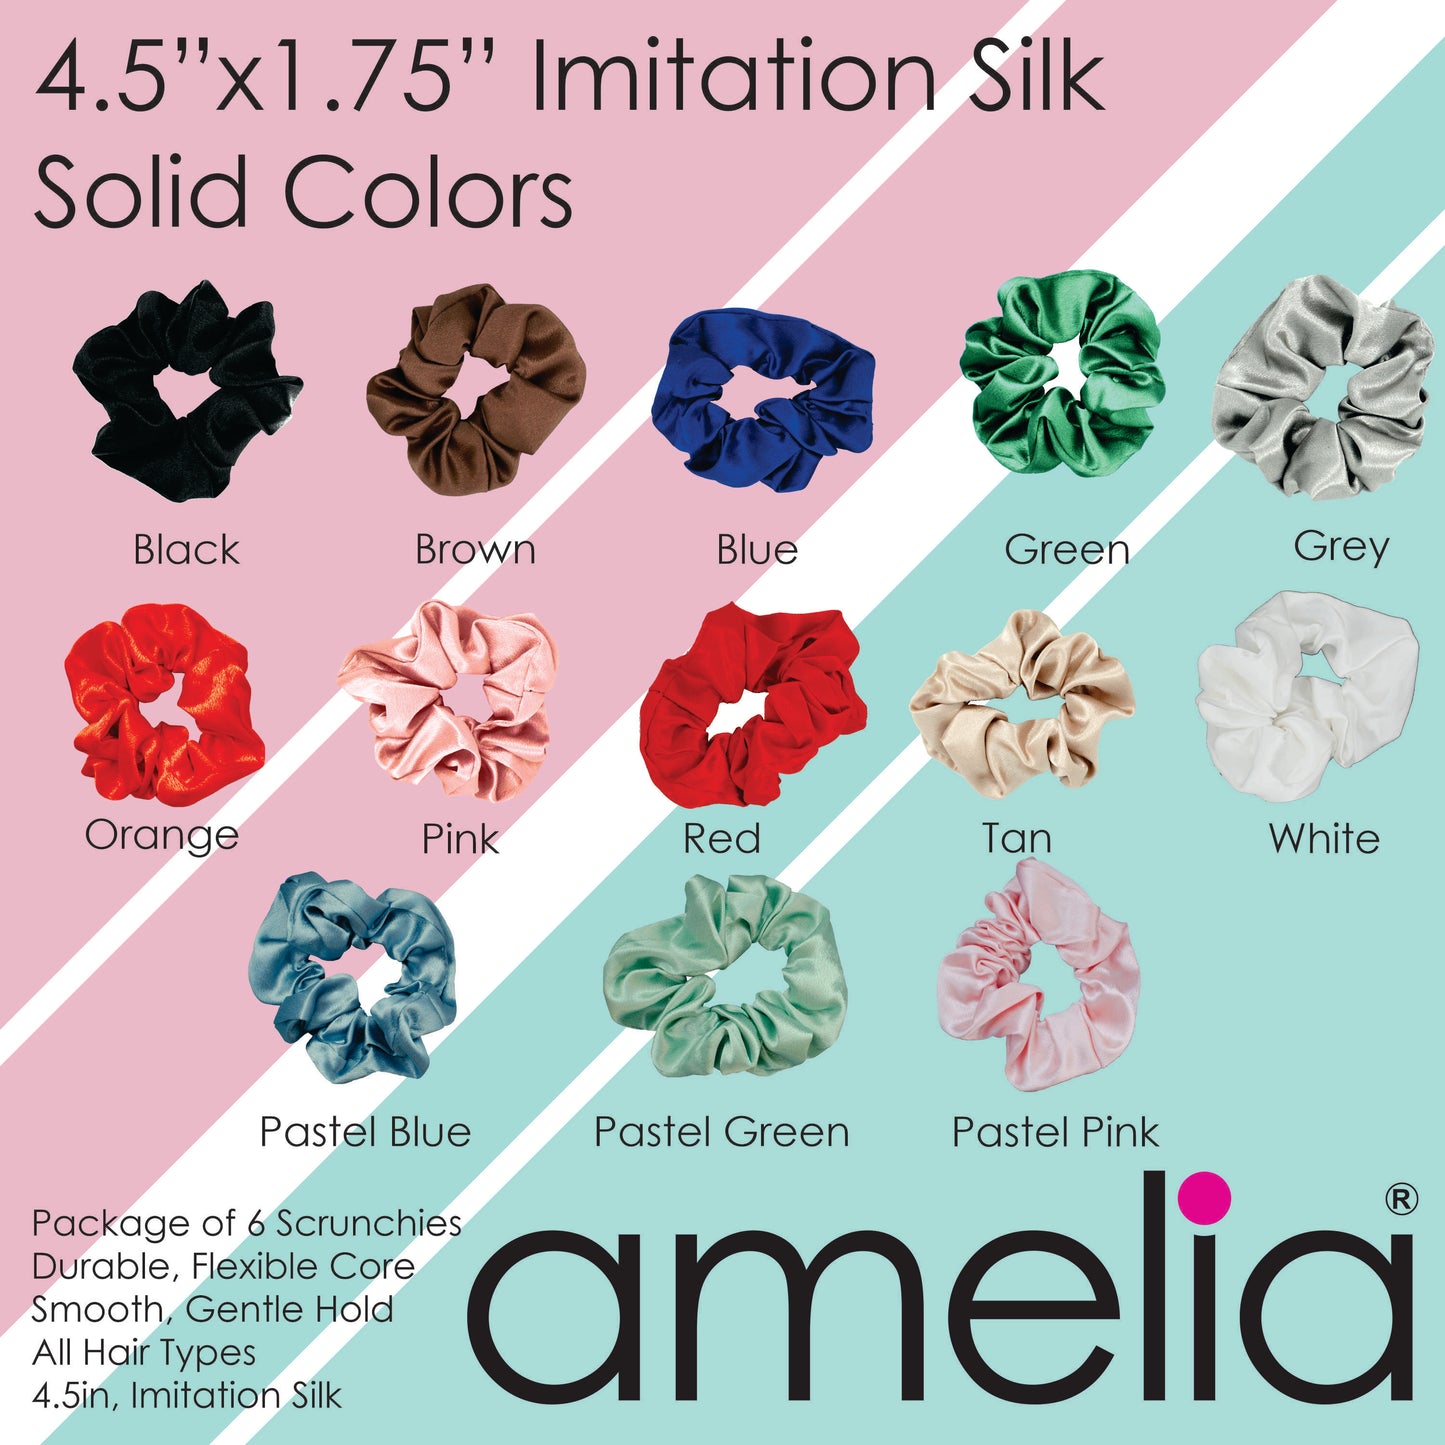 Amelia Beauty Products, Gray, White and Pink Imitation Silk Scrunchies, 4.5in Diameter, Gentle on Hair, Strong Hold, No Snag, No Dents or Creases. 6 Pack